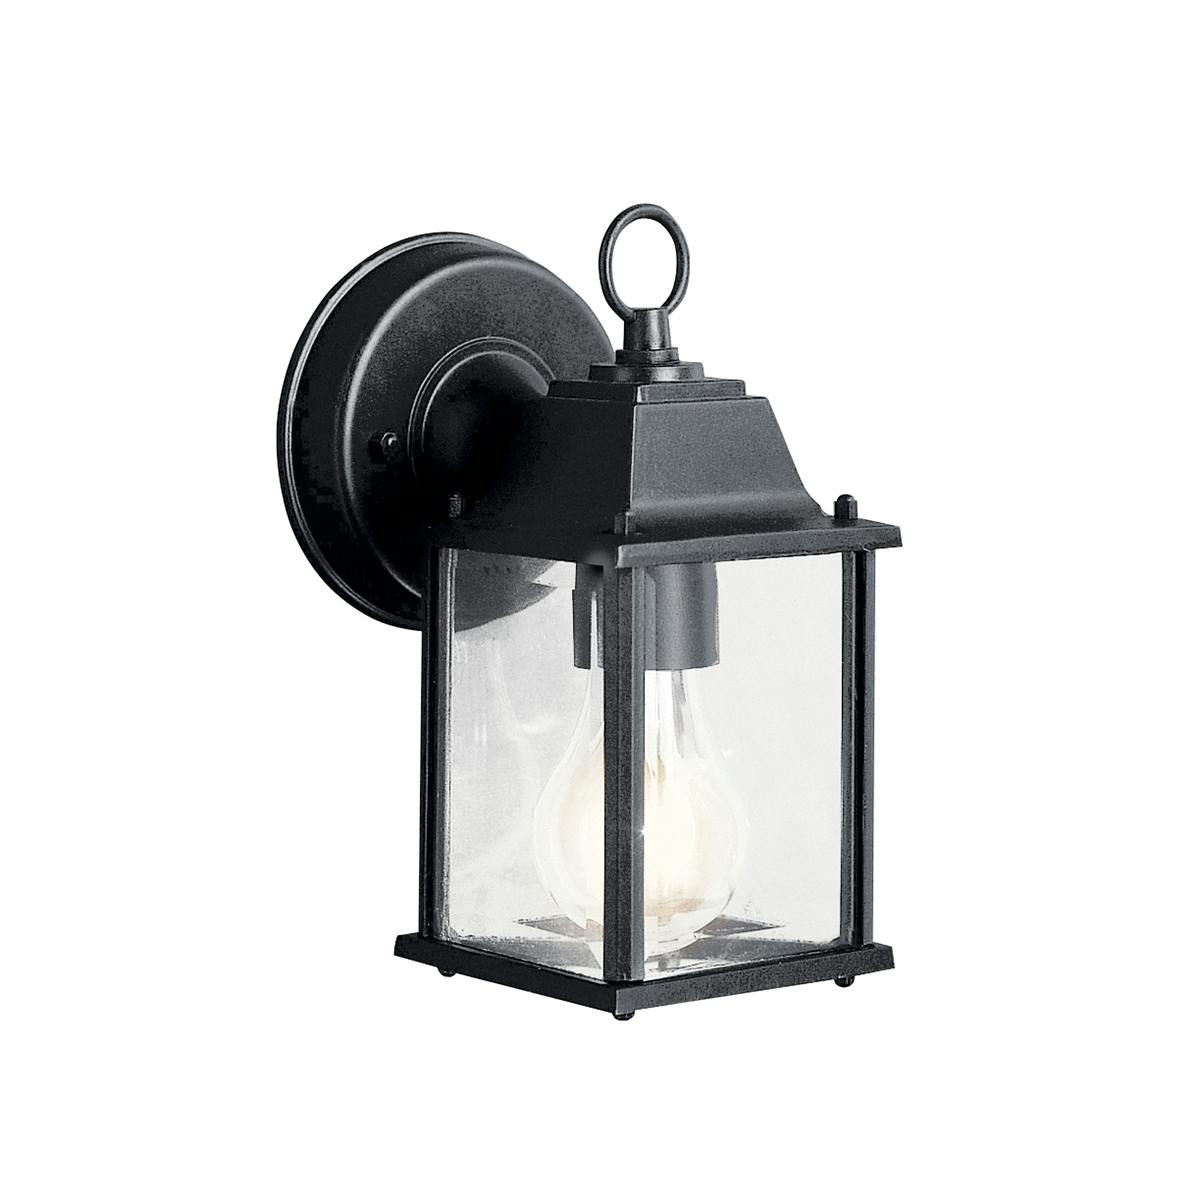 Barrie 8.5" Wall Light w/ LED Bulb Black on a white background